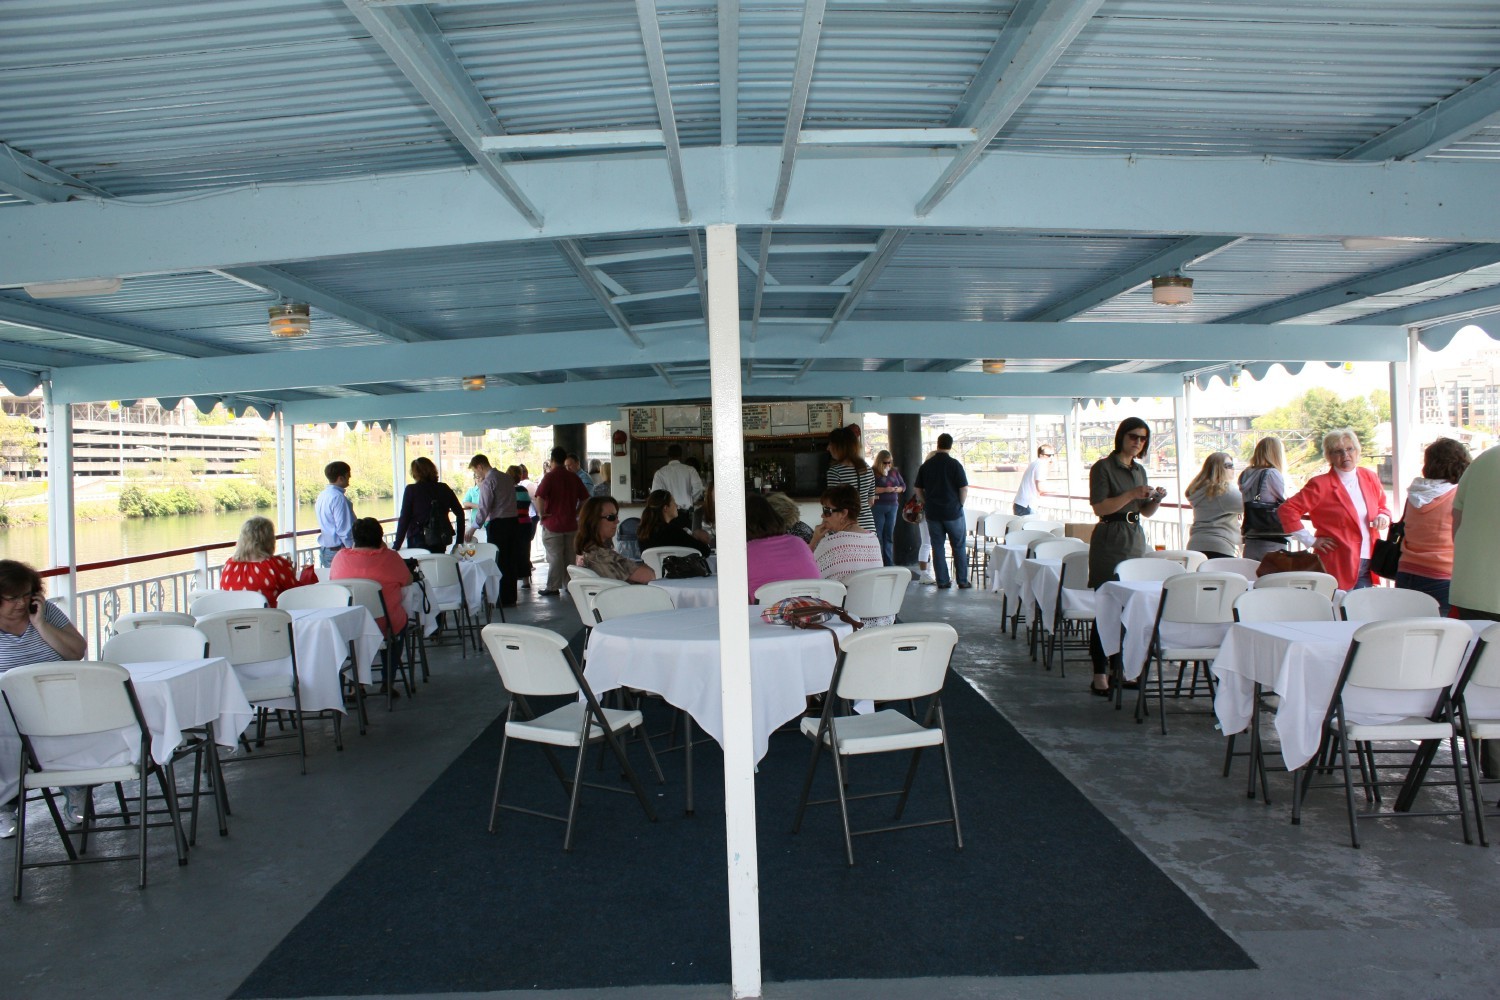 Each year we plan offsite events during work hours to build staff comradery.  This was a spring riverboat luncheon!